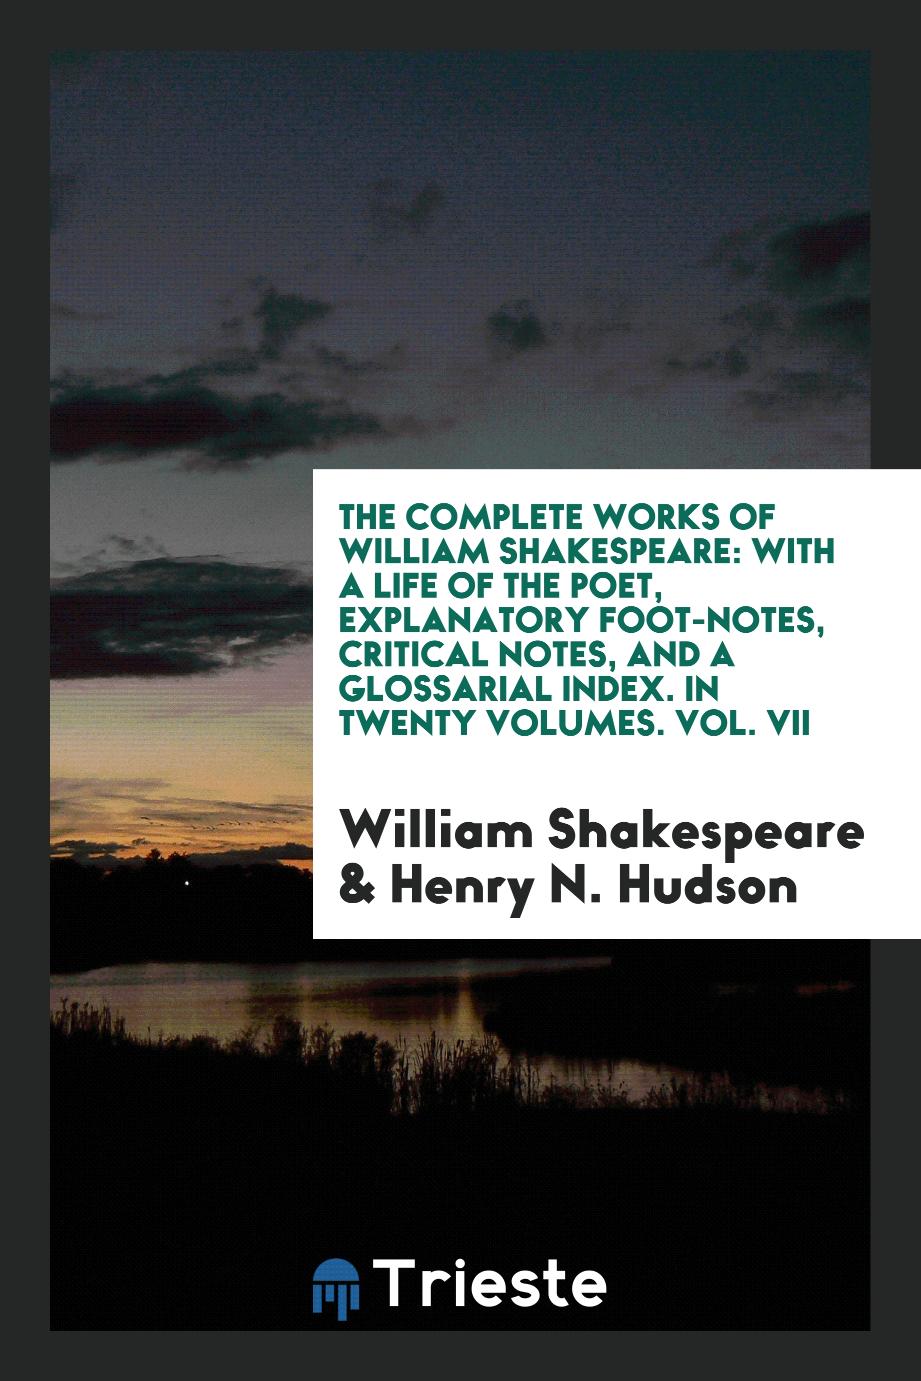 The Complete Works of William Shakespeare: With a Life of the Poet, Explanatory Foot-Notes, Critical Notes, and a Glossarial Index. In Twenty Volumes. Vol. VII